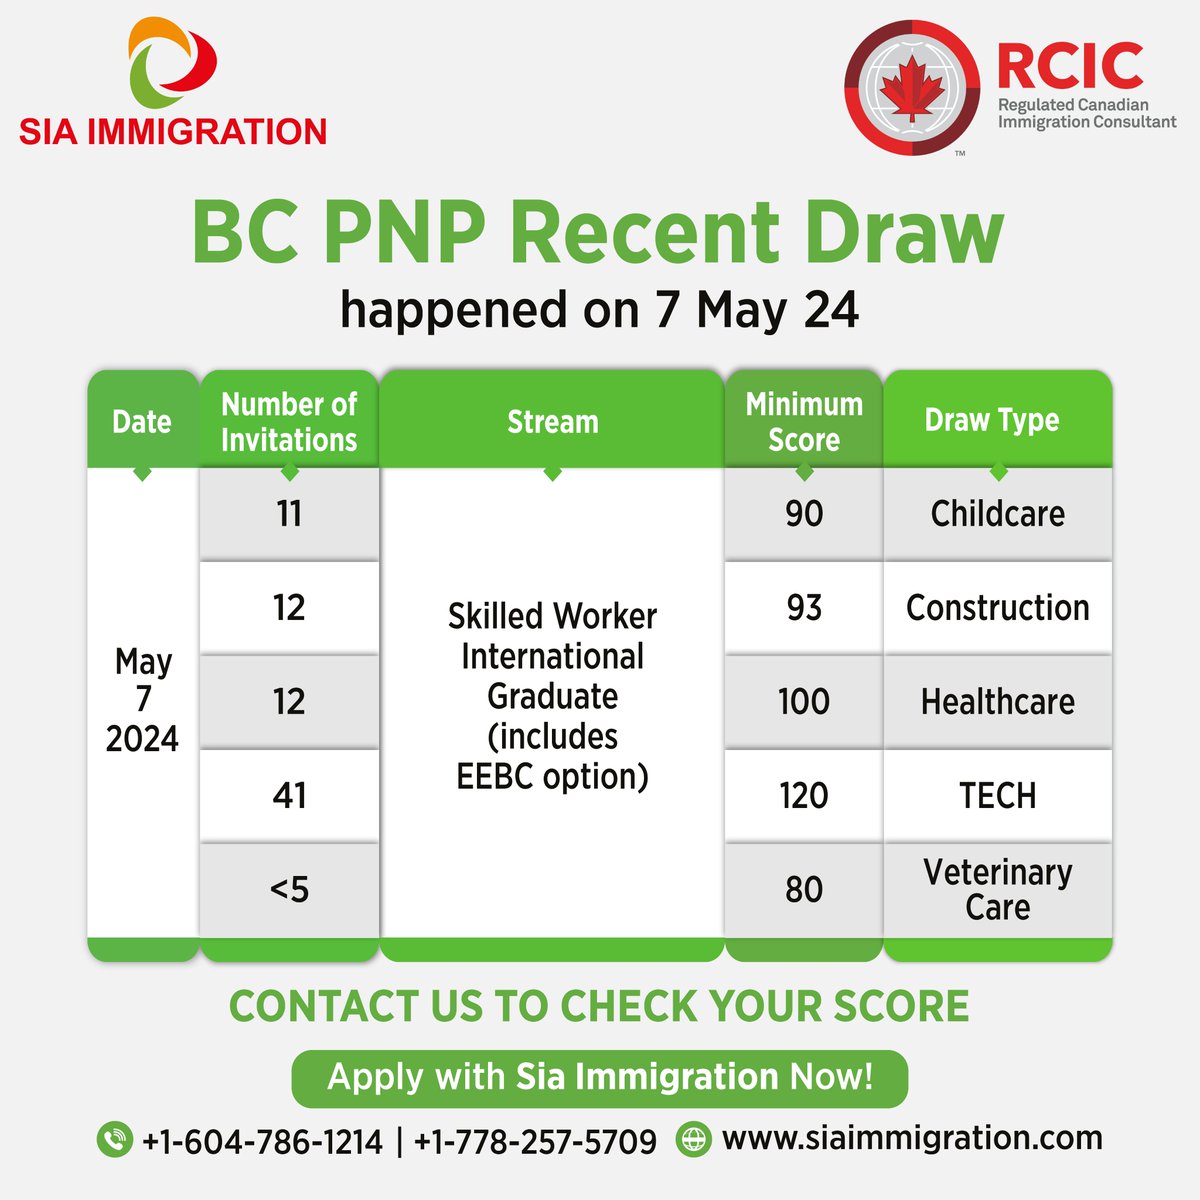 The BC PNP recent draw happened on 7 May, 2024.

Apply with Sia Immigration Now @ +1-604-786-1214, +1-778-257-5709

visit: siaimmigration.com
#BCPNP #bcpnpDraw #PNPDraw2024 #7May #LatestDrawPNP #BritishColumbia #ProvinceNomineeProgram #SkilledImmigration #SkilledWorkers